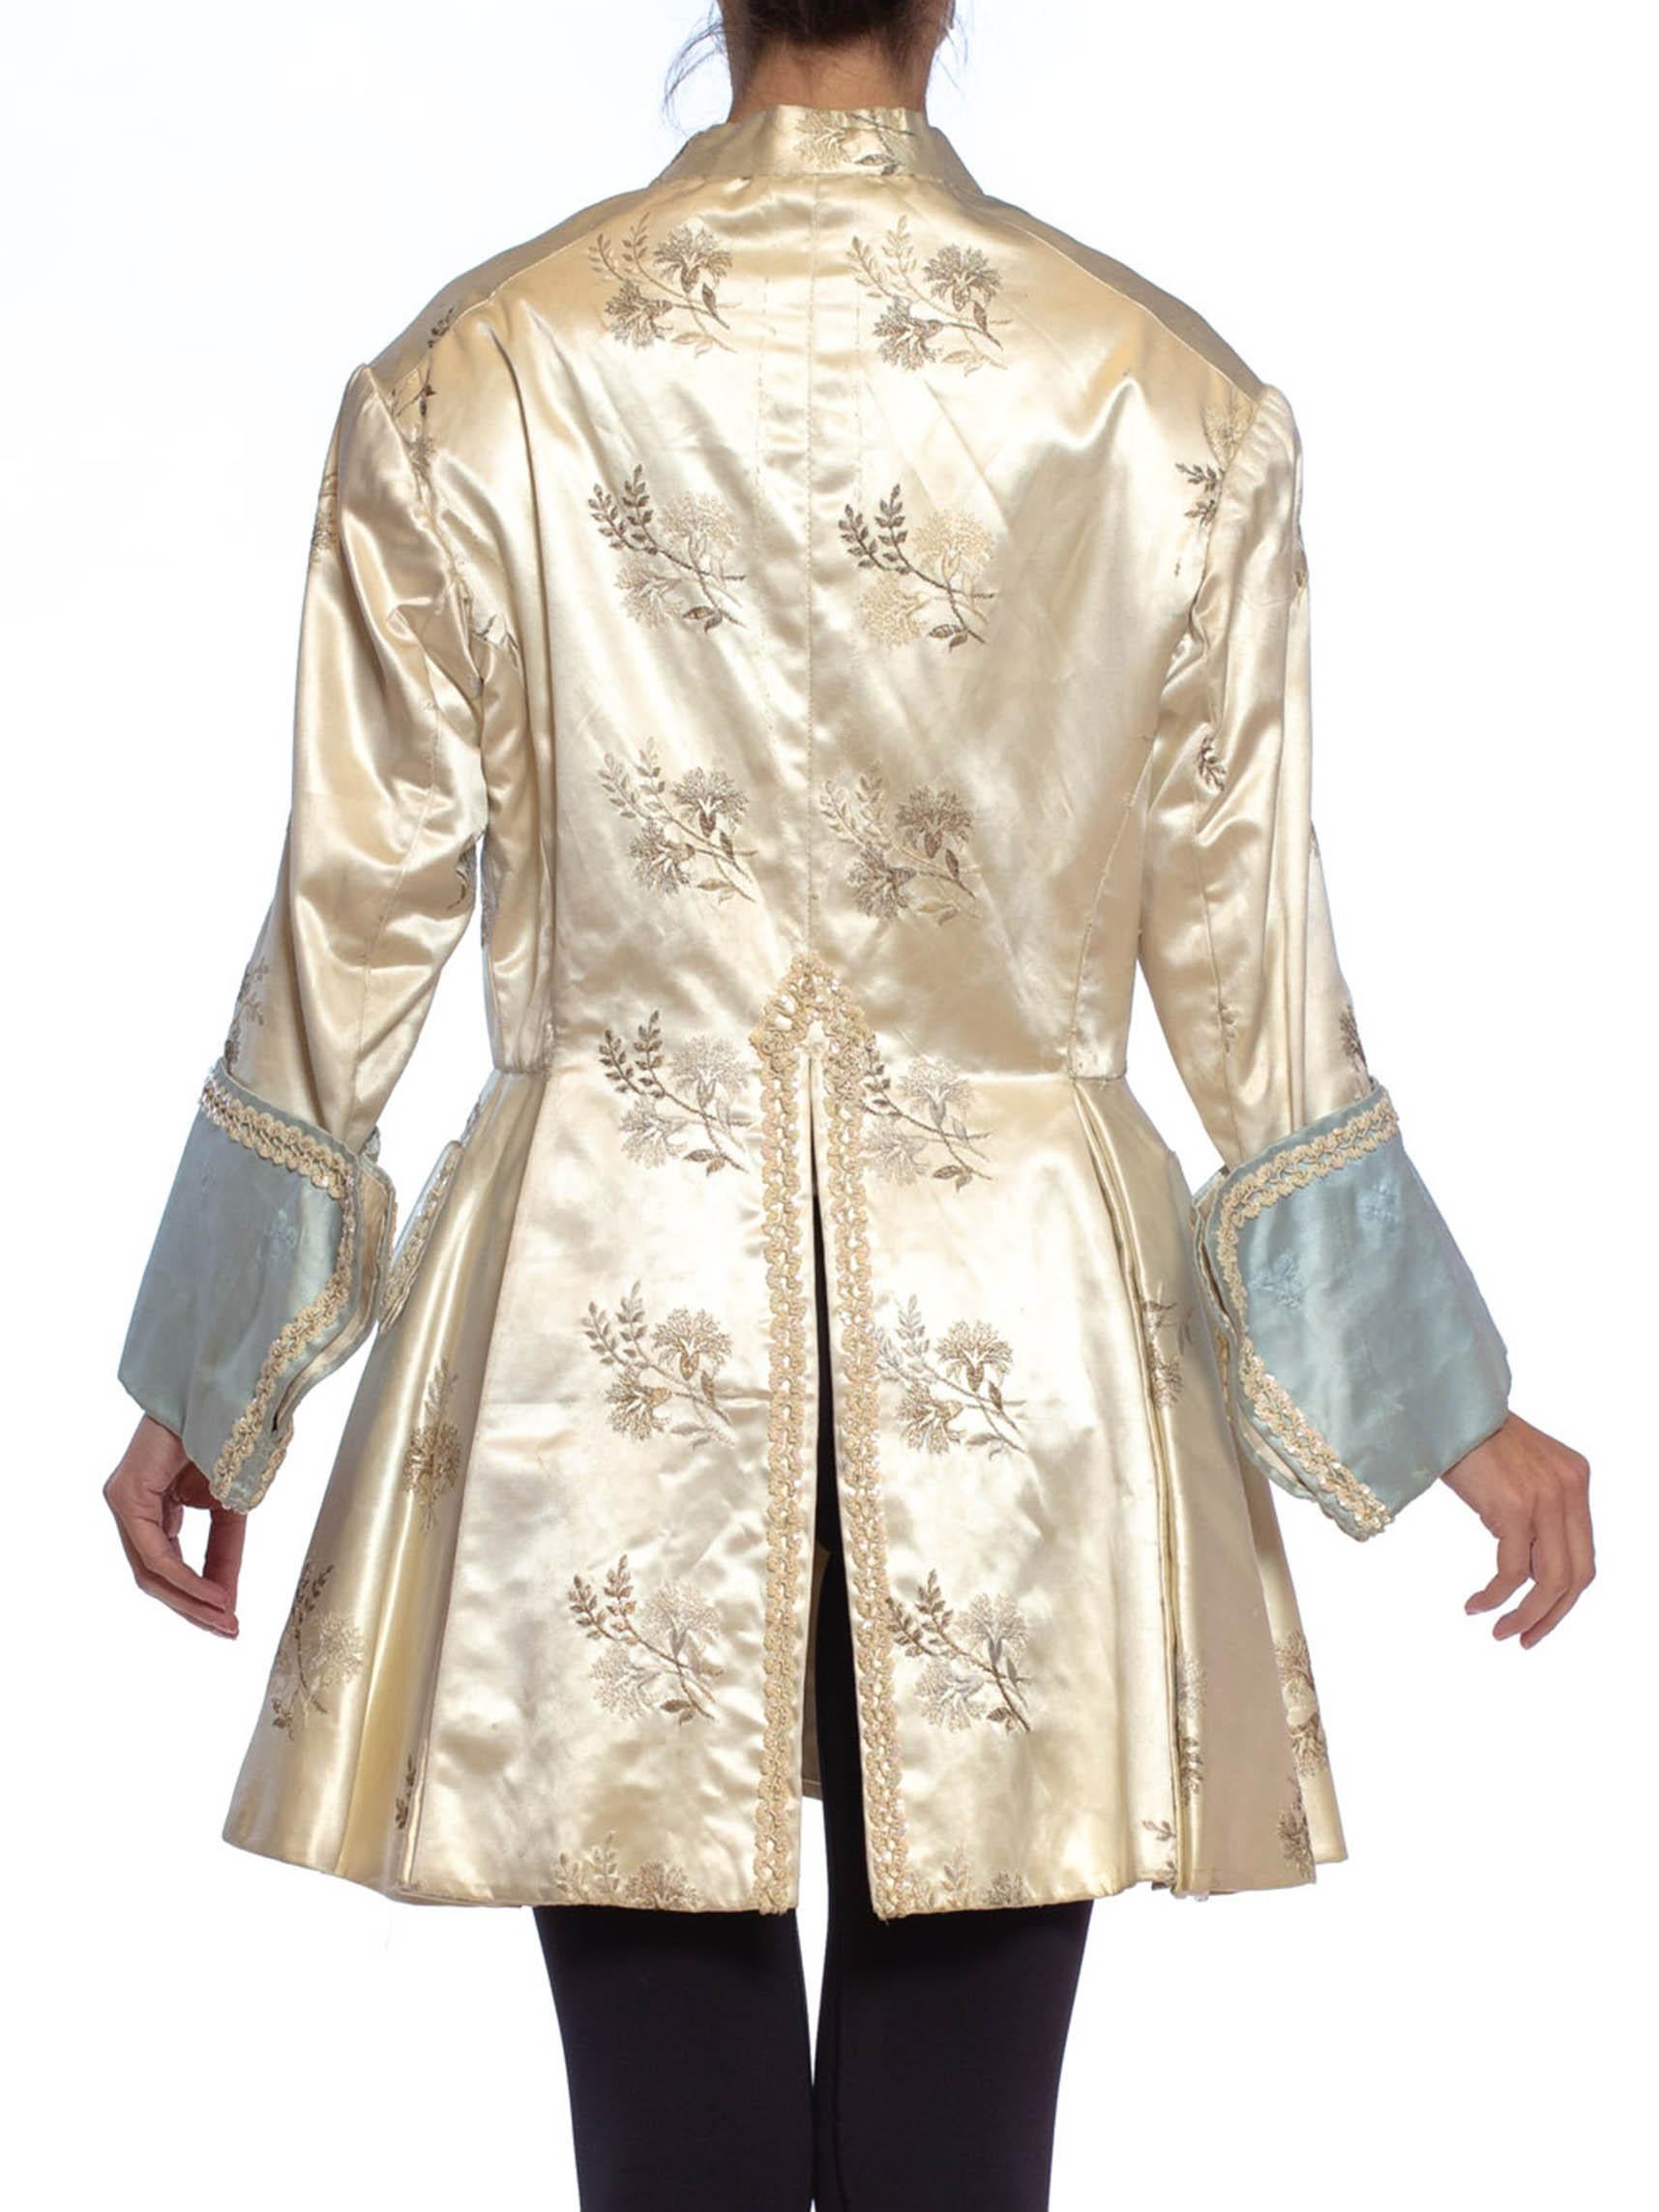 1940S White Rayon Satin Men's Floral Embroidered Frock Coat Jacket From France For Sale 4